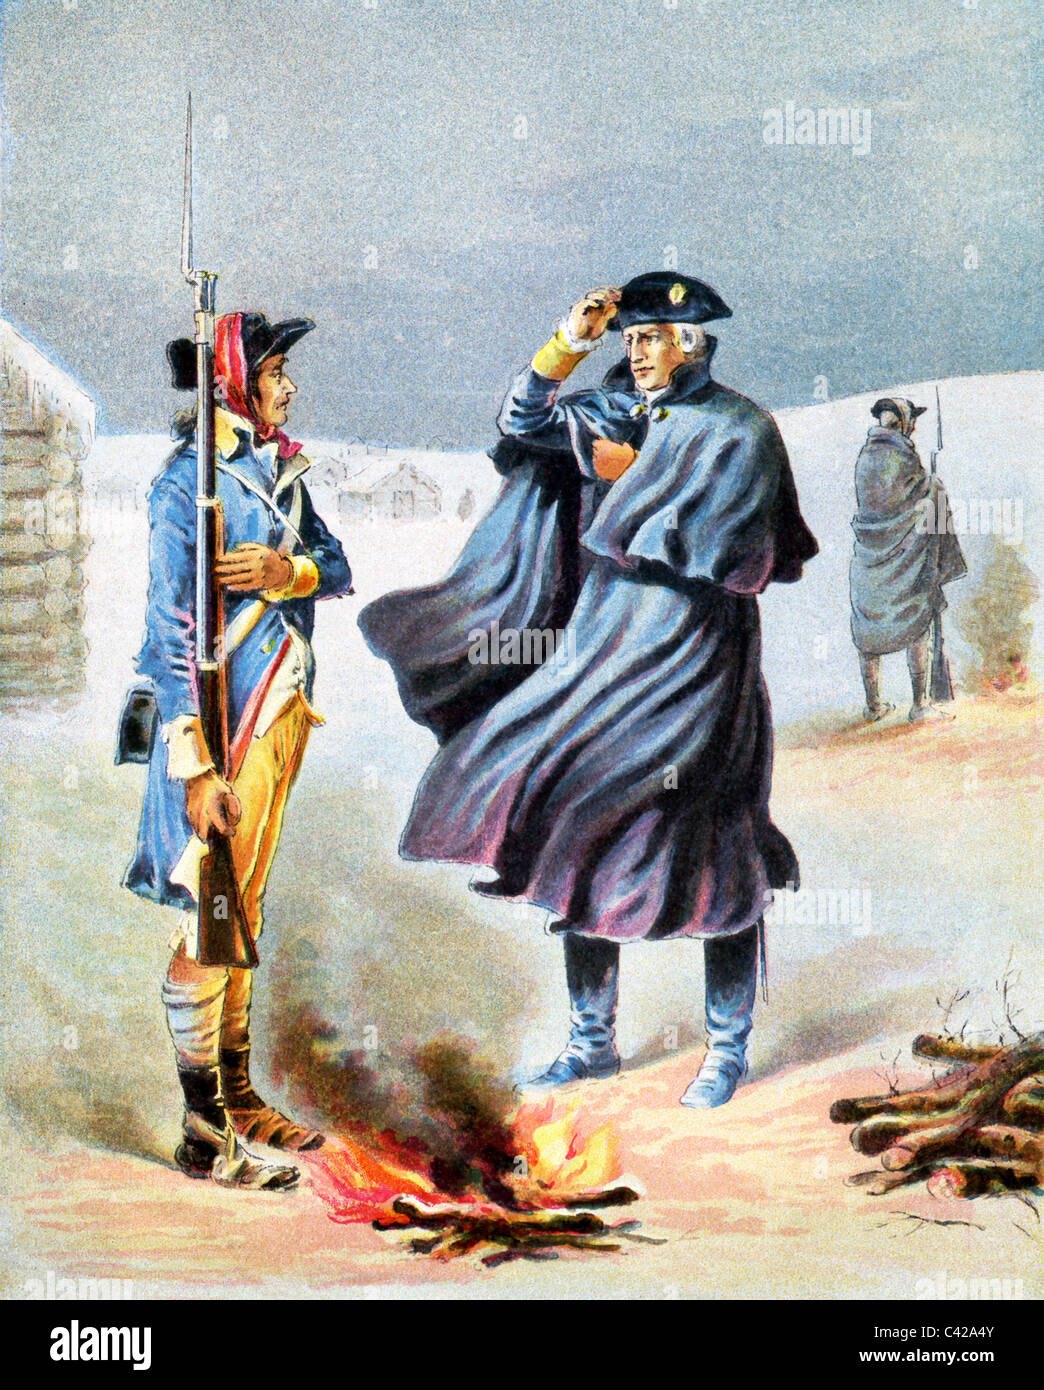 During the American Revolution, George Washington and his Continental Army spent the winter of 1777-1778 camped at Valley Forge. Stock Photo